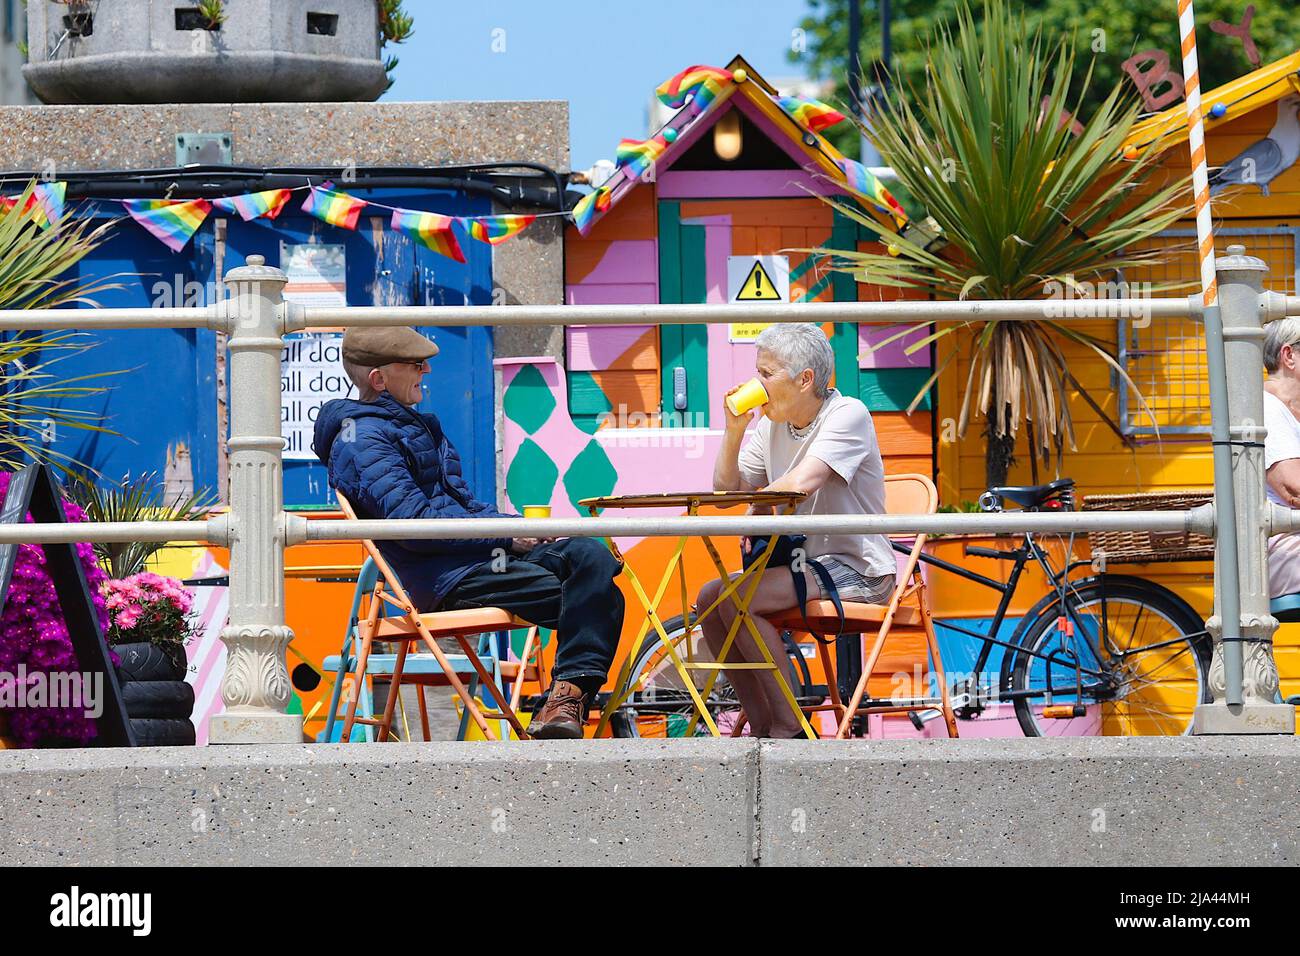 Hastings, East Sussex, UK. 27 May, 2022. UK Weather: Sunny intervals in the seaside town of Hastings in East Sussex as Brits enjoy the warm weather today along the seafront promenade. Photo Credit: Paul Lawrenson /Alamy Live News Stock Photo